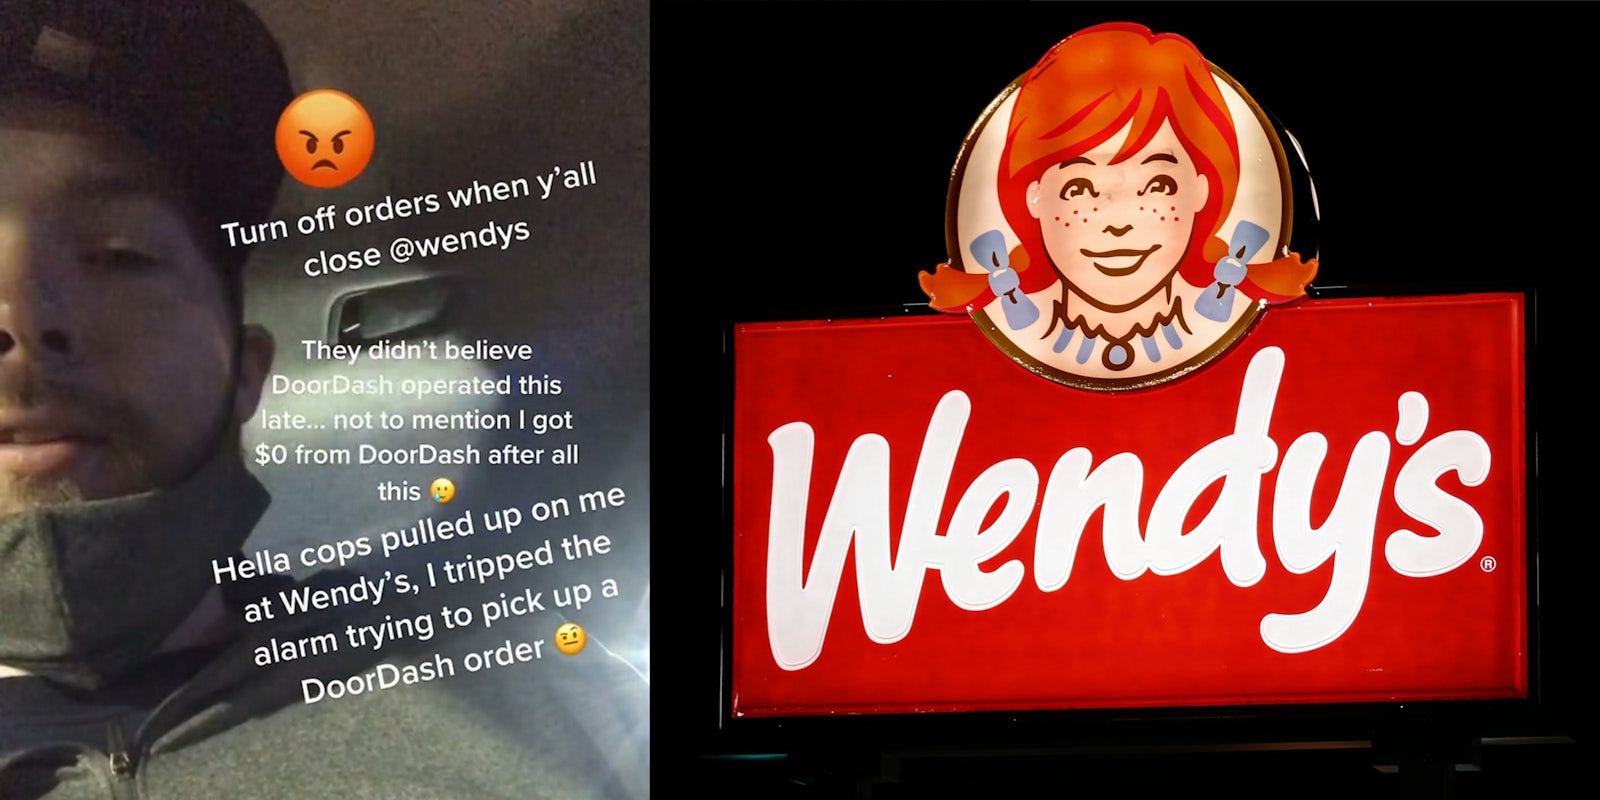 man in driver's seat with lights in rear window with caption 'turn off orders when y'all close @wendys - they didn't believe DoorDash operated this late... not to mention I got $0 from DoorDash after all this - Hella cops pulled up on me at Wendy's, I tripped the alarm trying to pick up a DoorDash order' (l) wendy's sign (r)